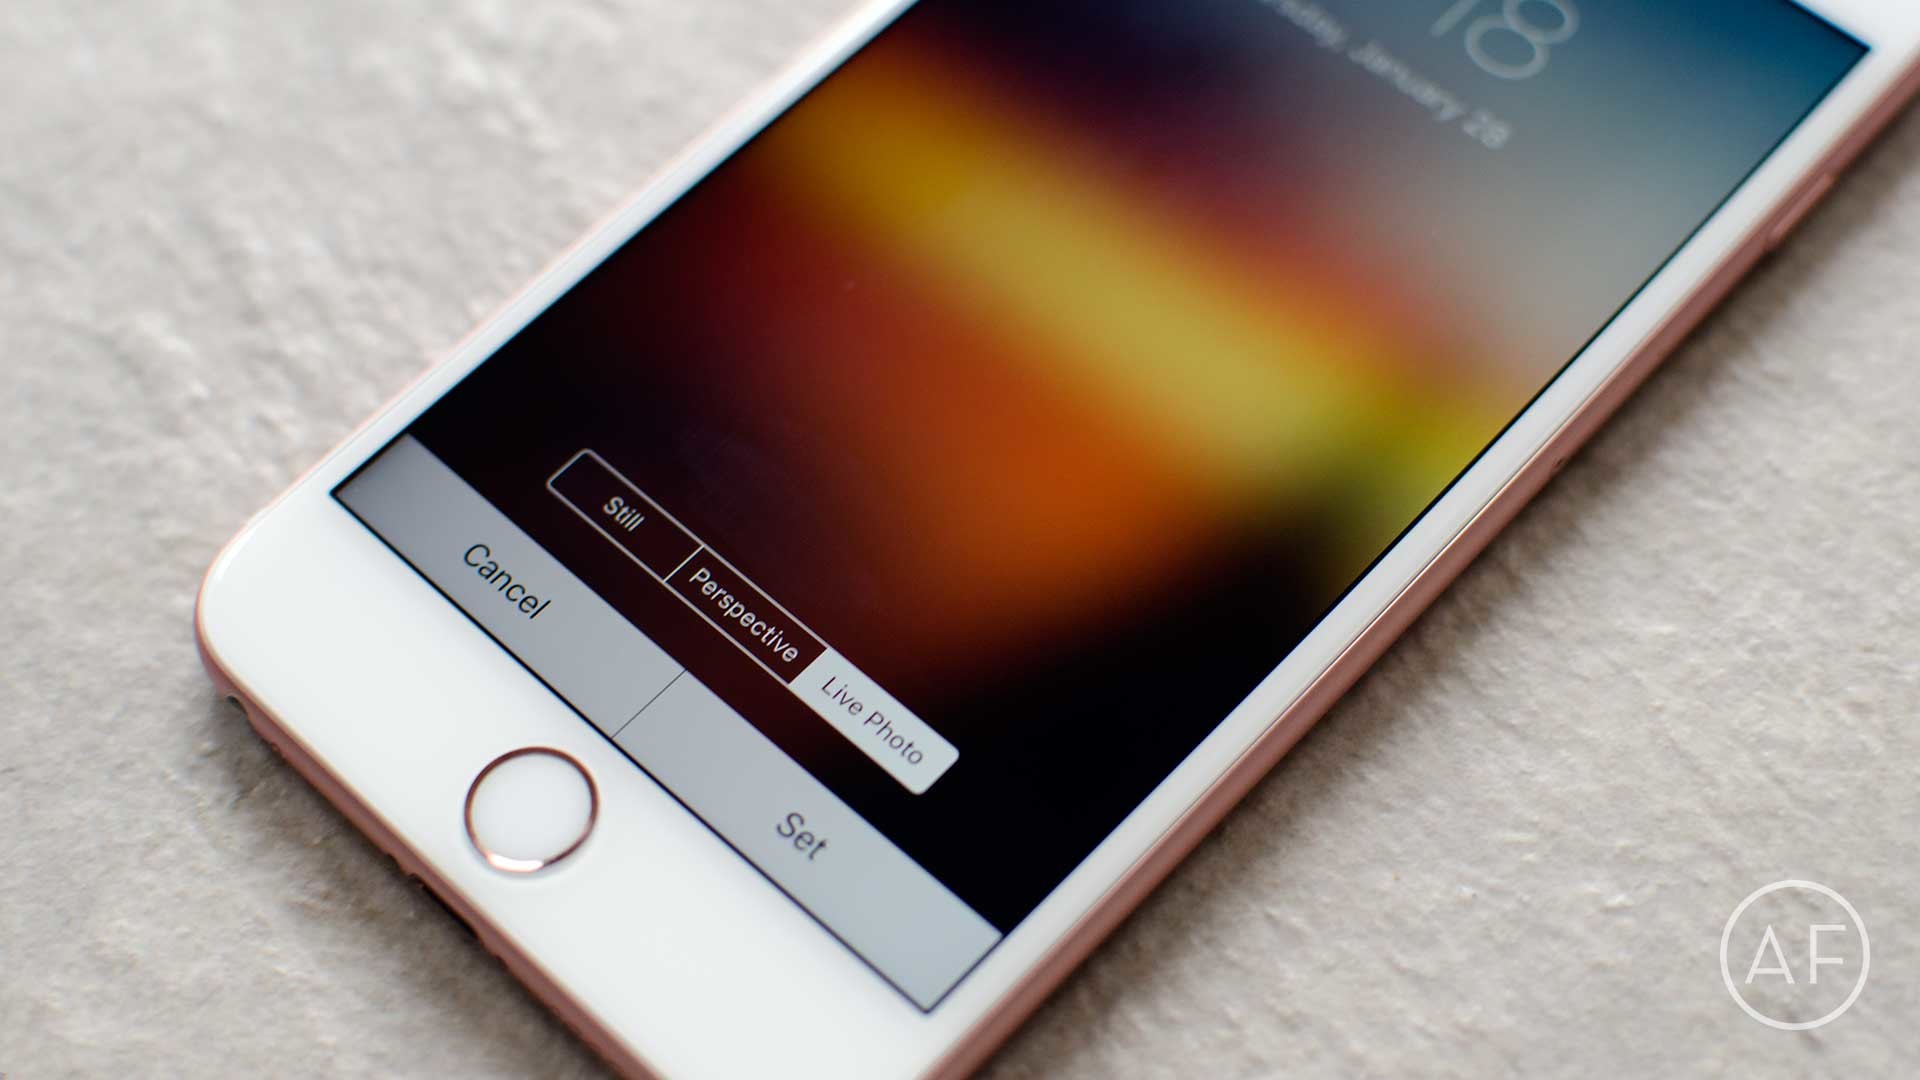 1920x1080 How to make any picture a Live Wallpaper on iPhone 6s and iPhone 6s Plus |  Cult of Mac